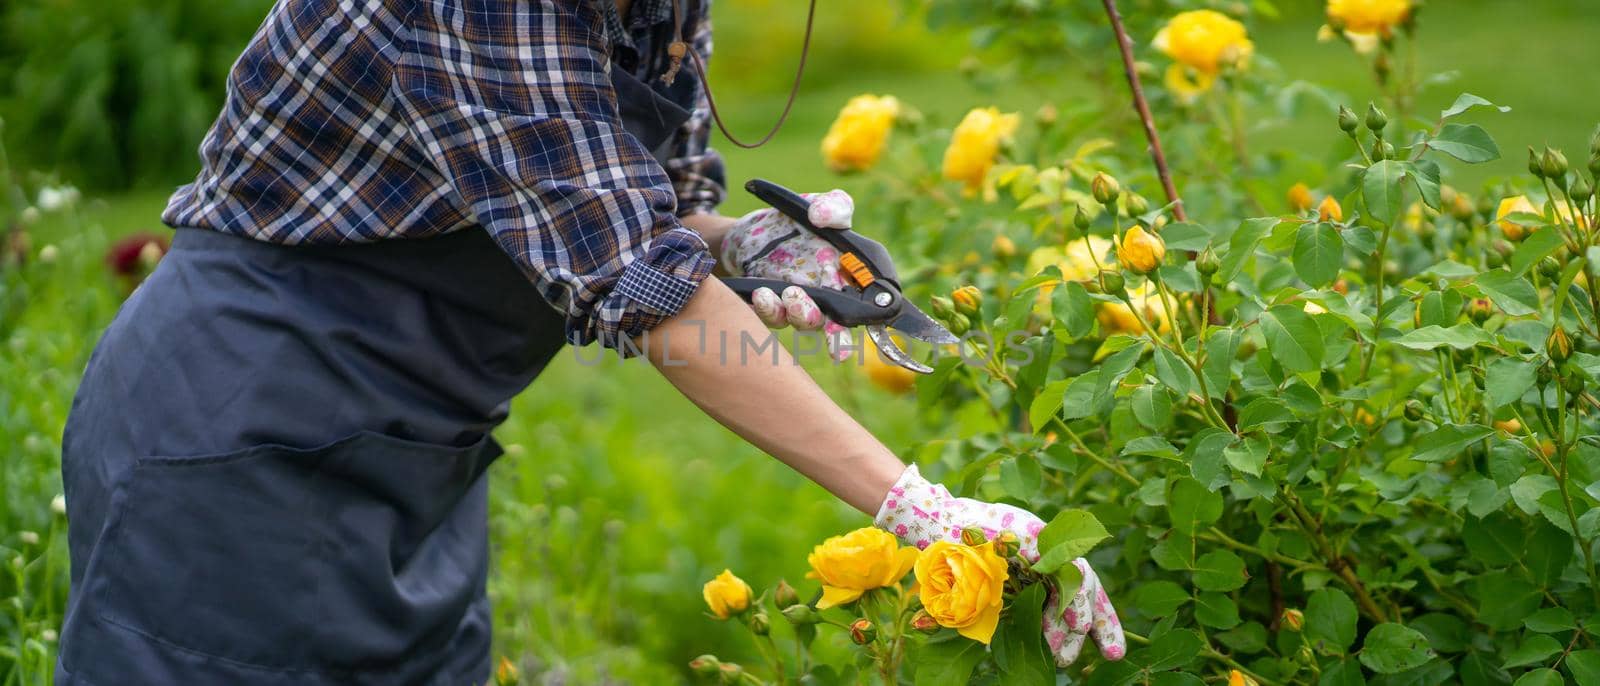 A woman is involved in gardening and farming, a gardener in an apron and a plaid shirt with a pruner cuts a branch of a lush bush with yellow roses in his garden on a sunny summer day.